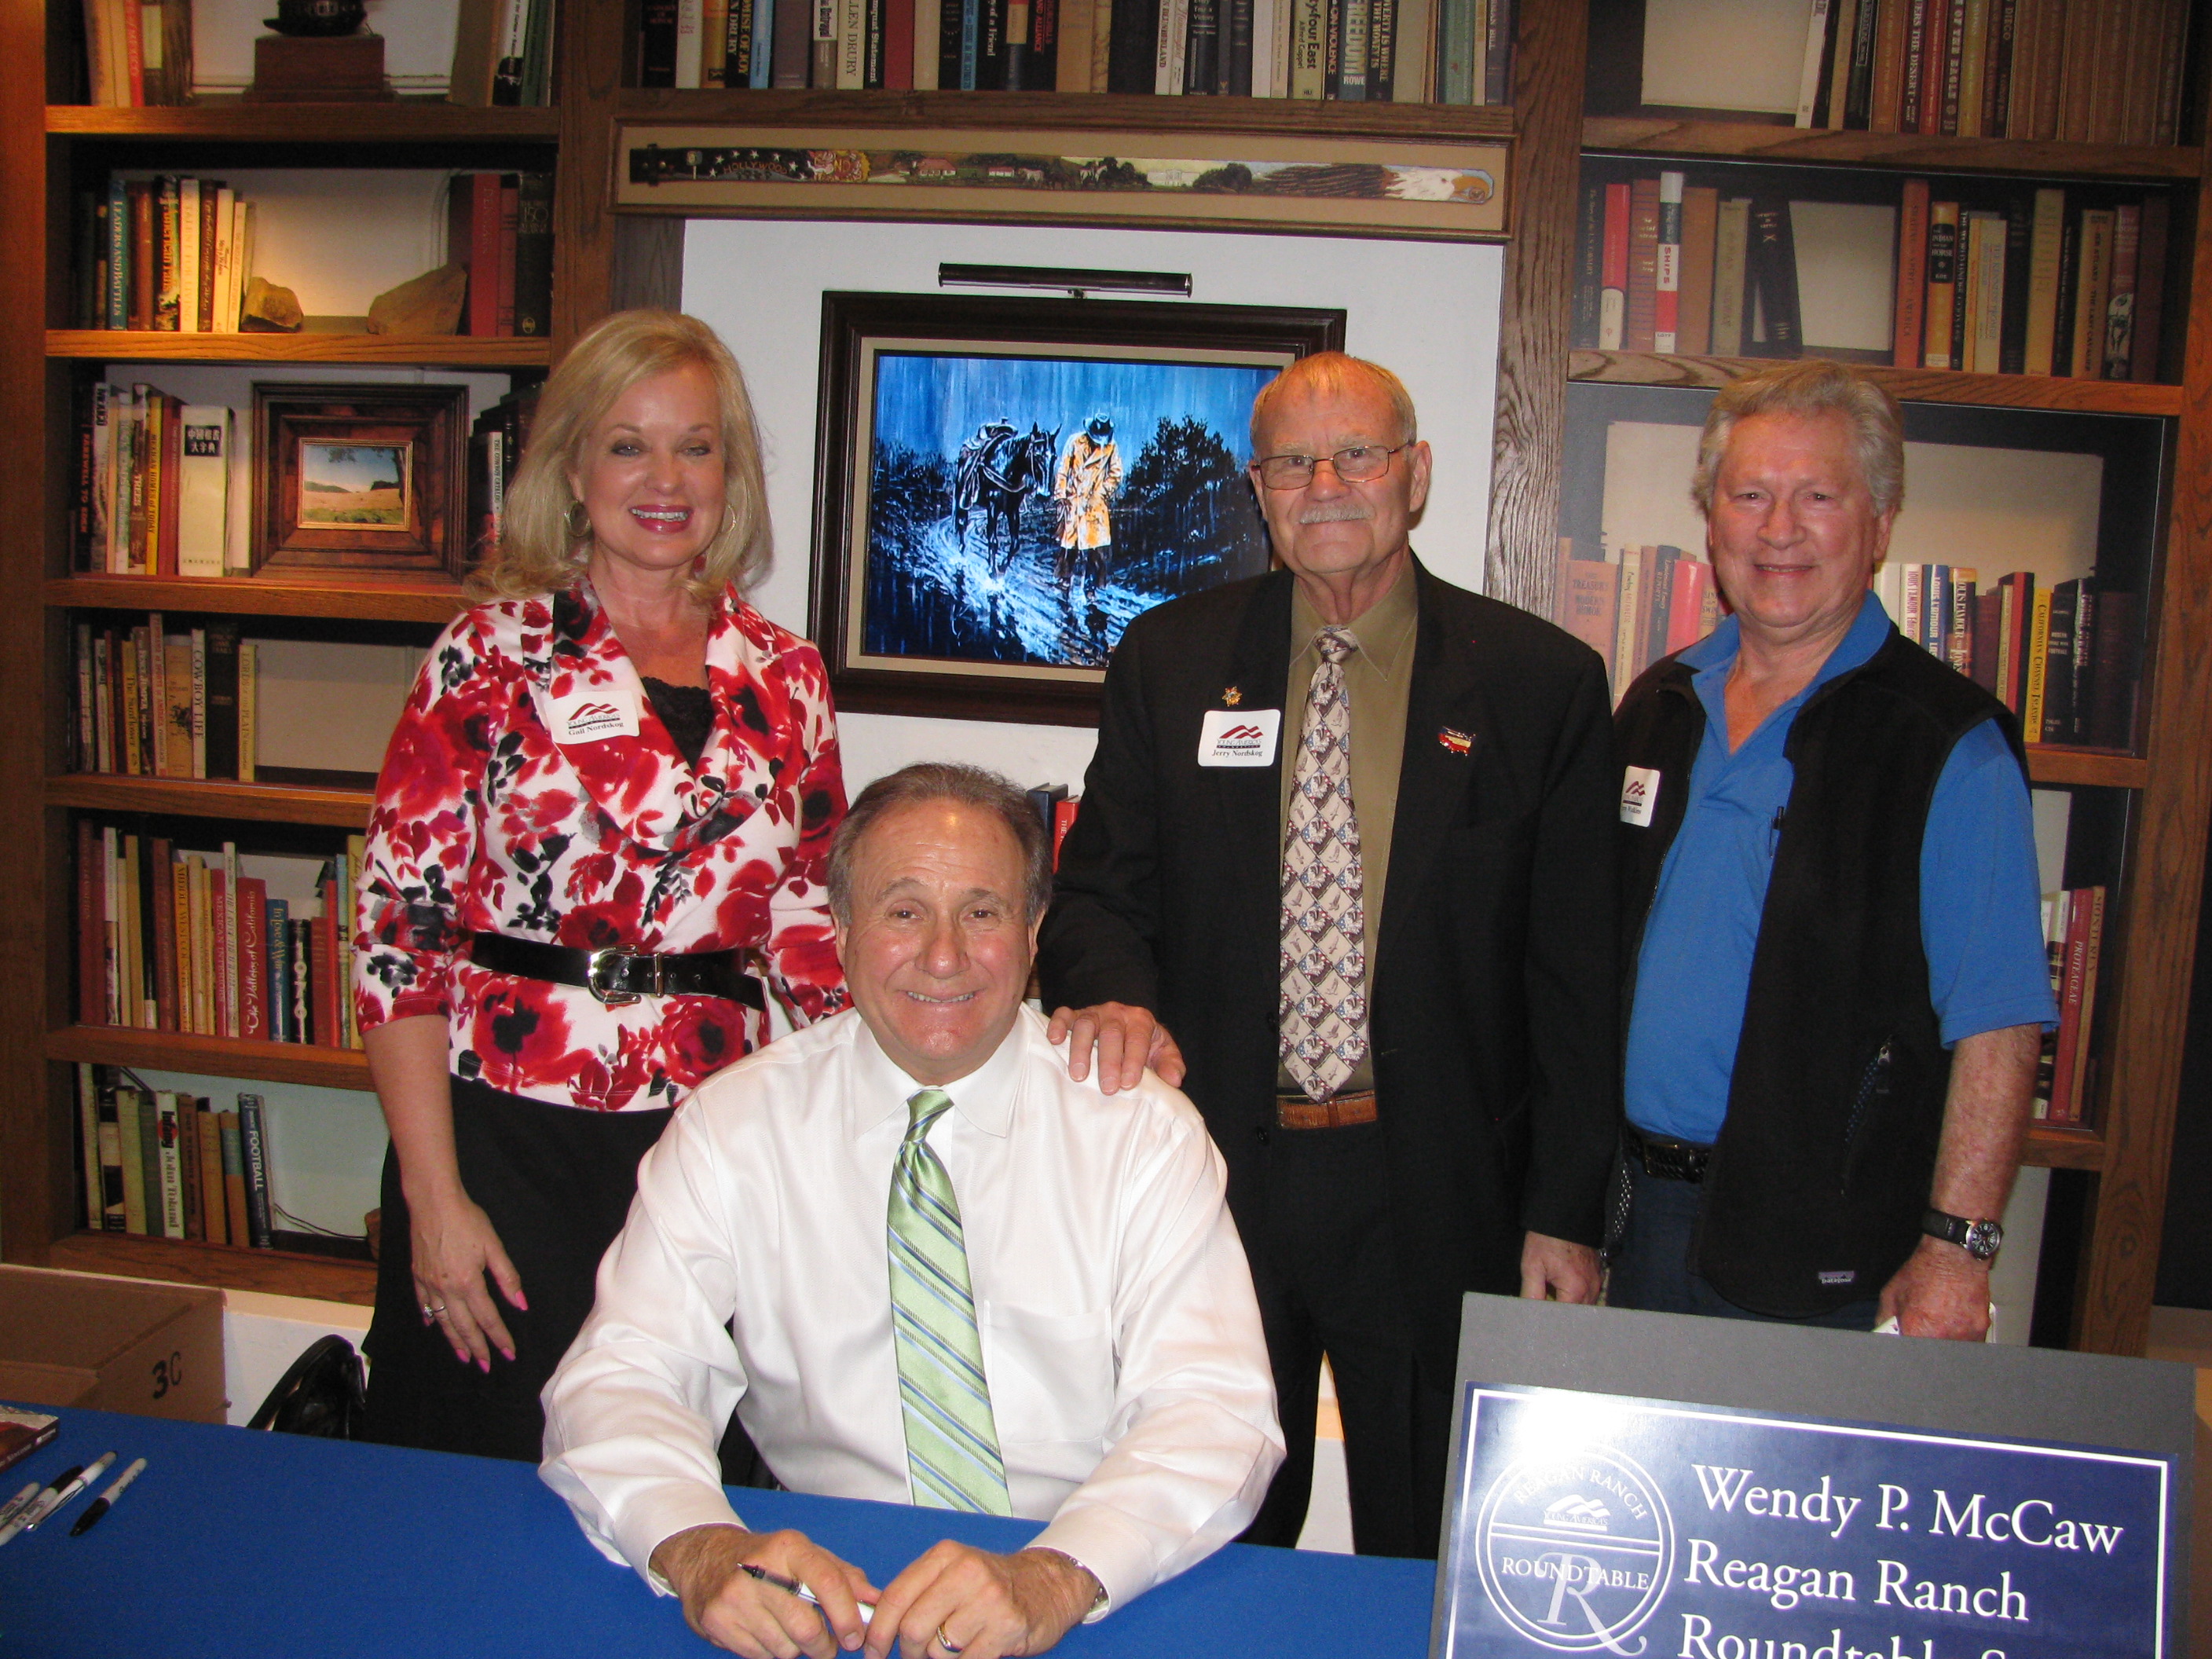 Jerry and Gail with Michael Reagan